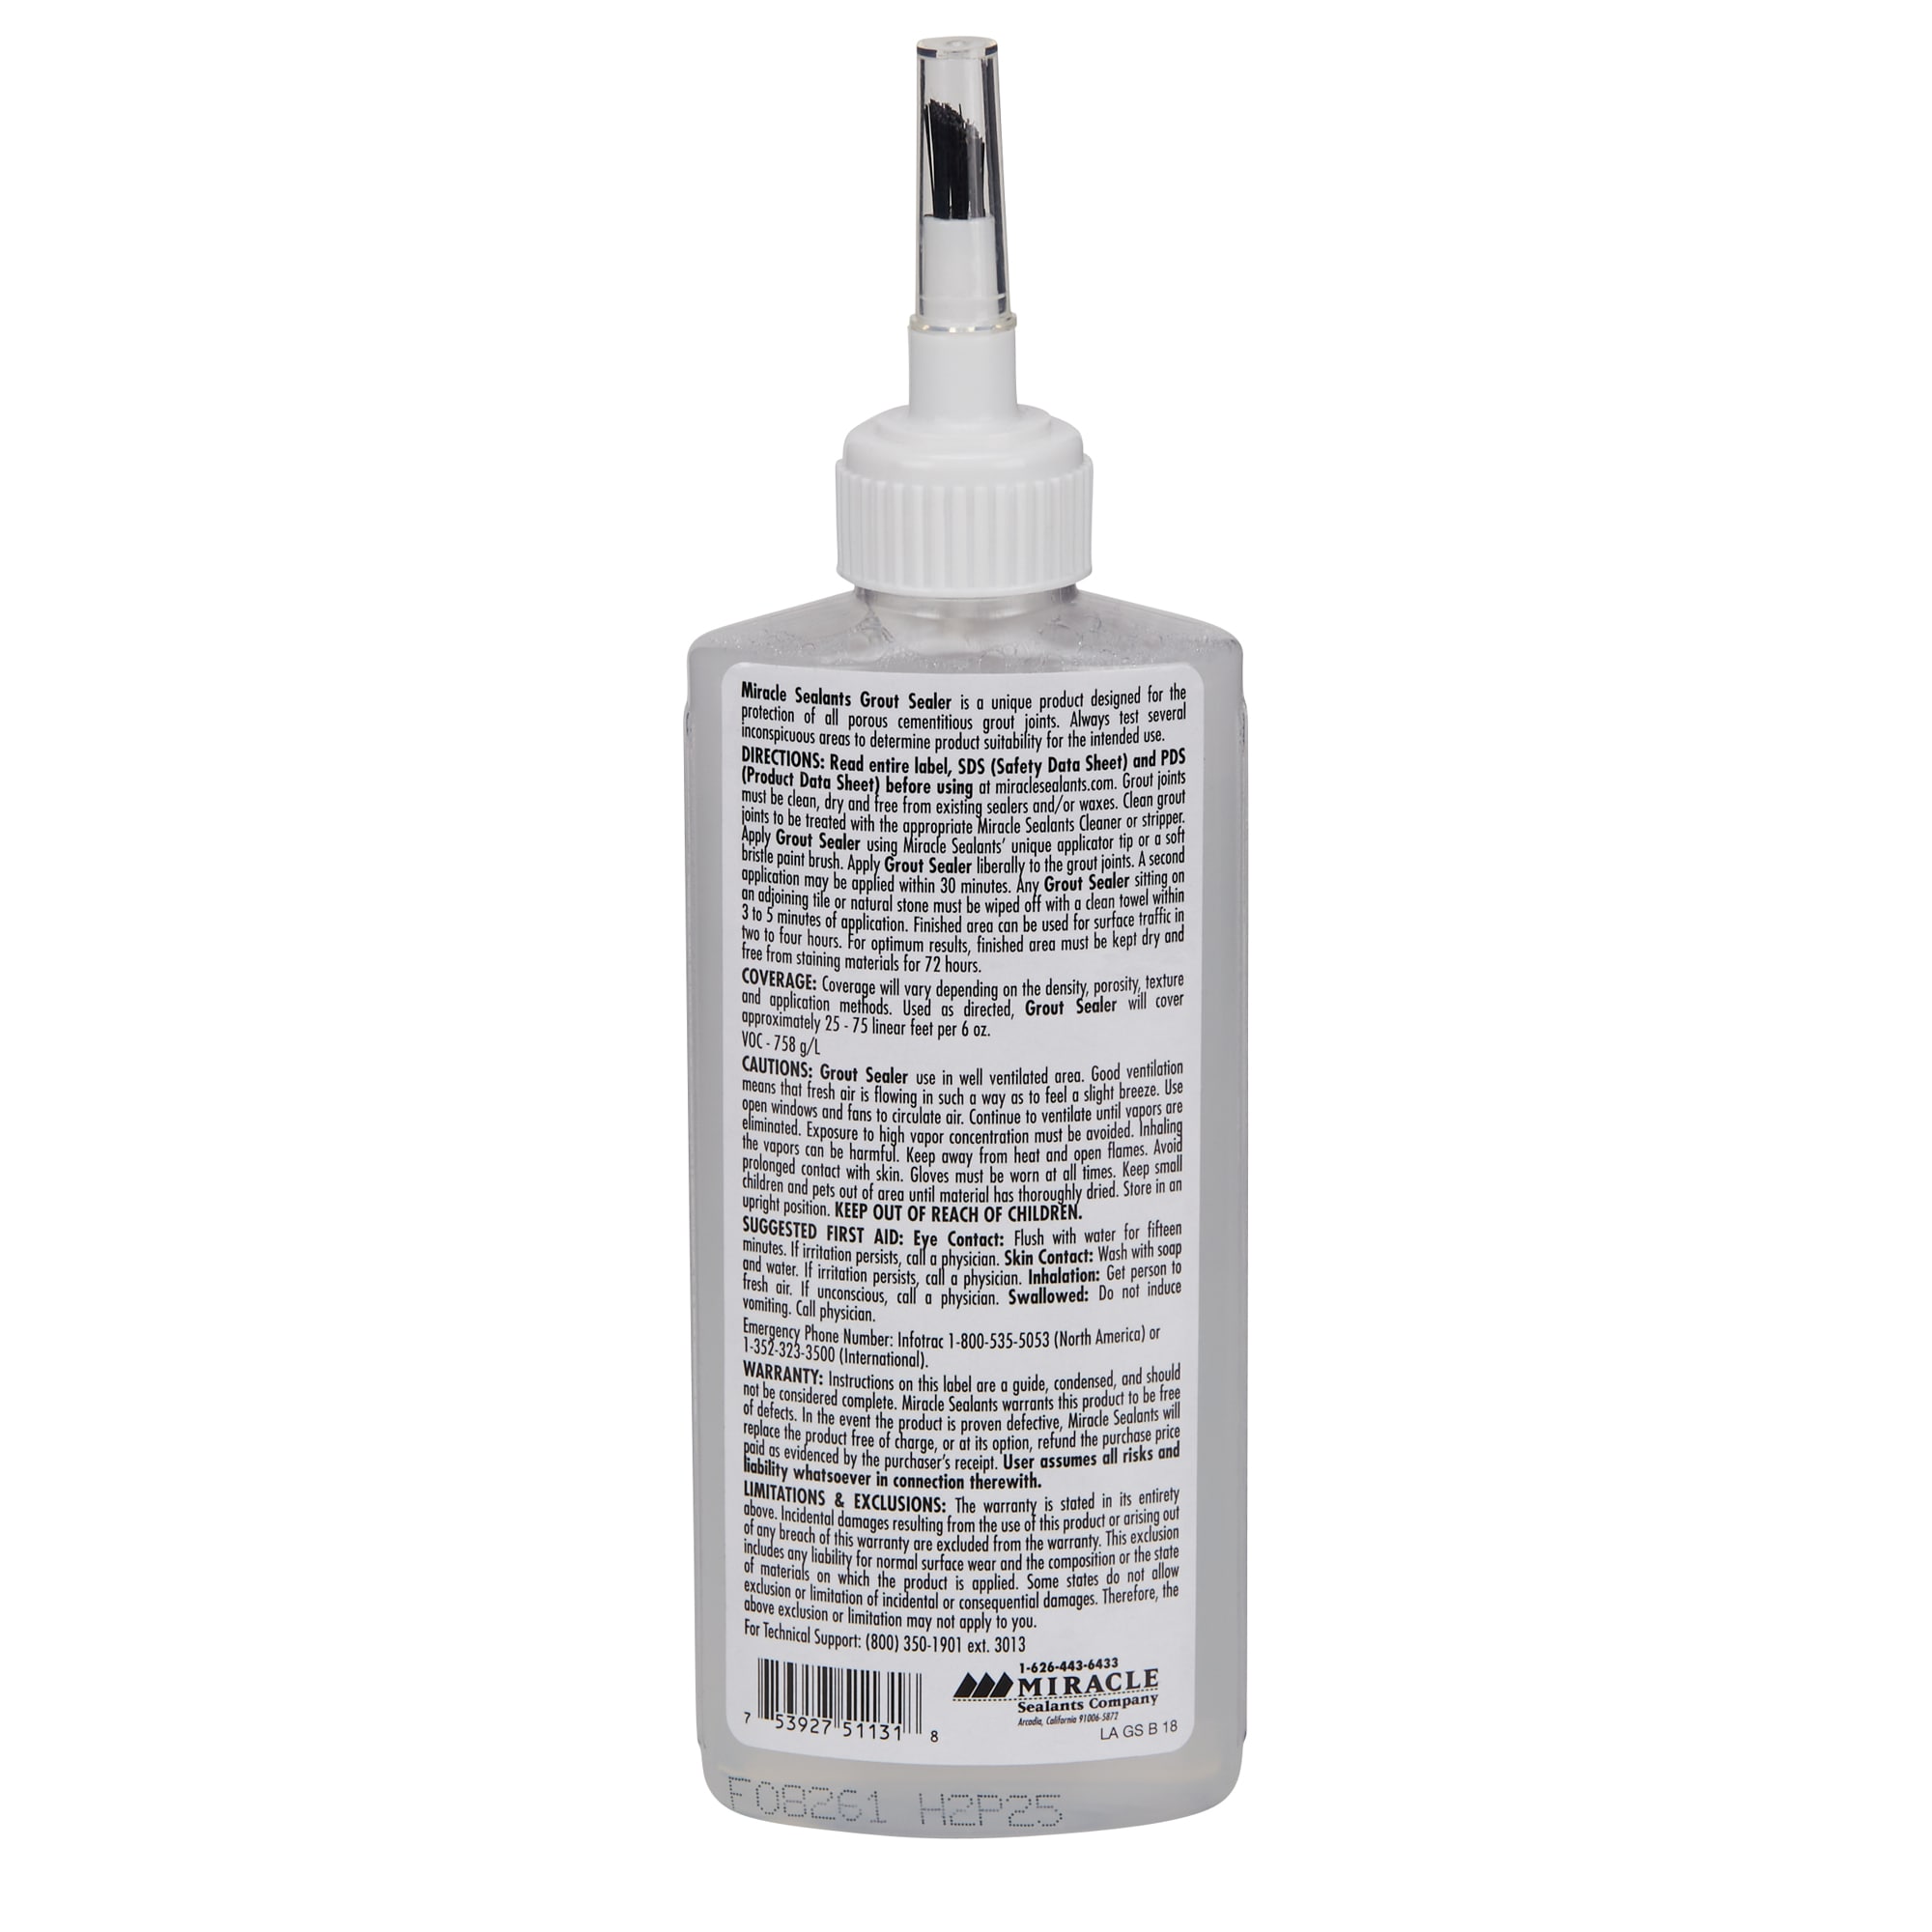 Grout Sealer - 6 oz. Bottle with Applicator - NWest Tools